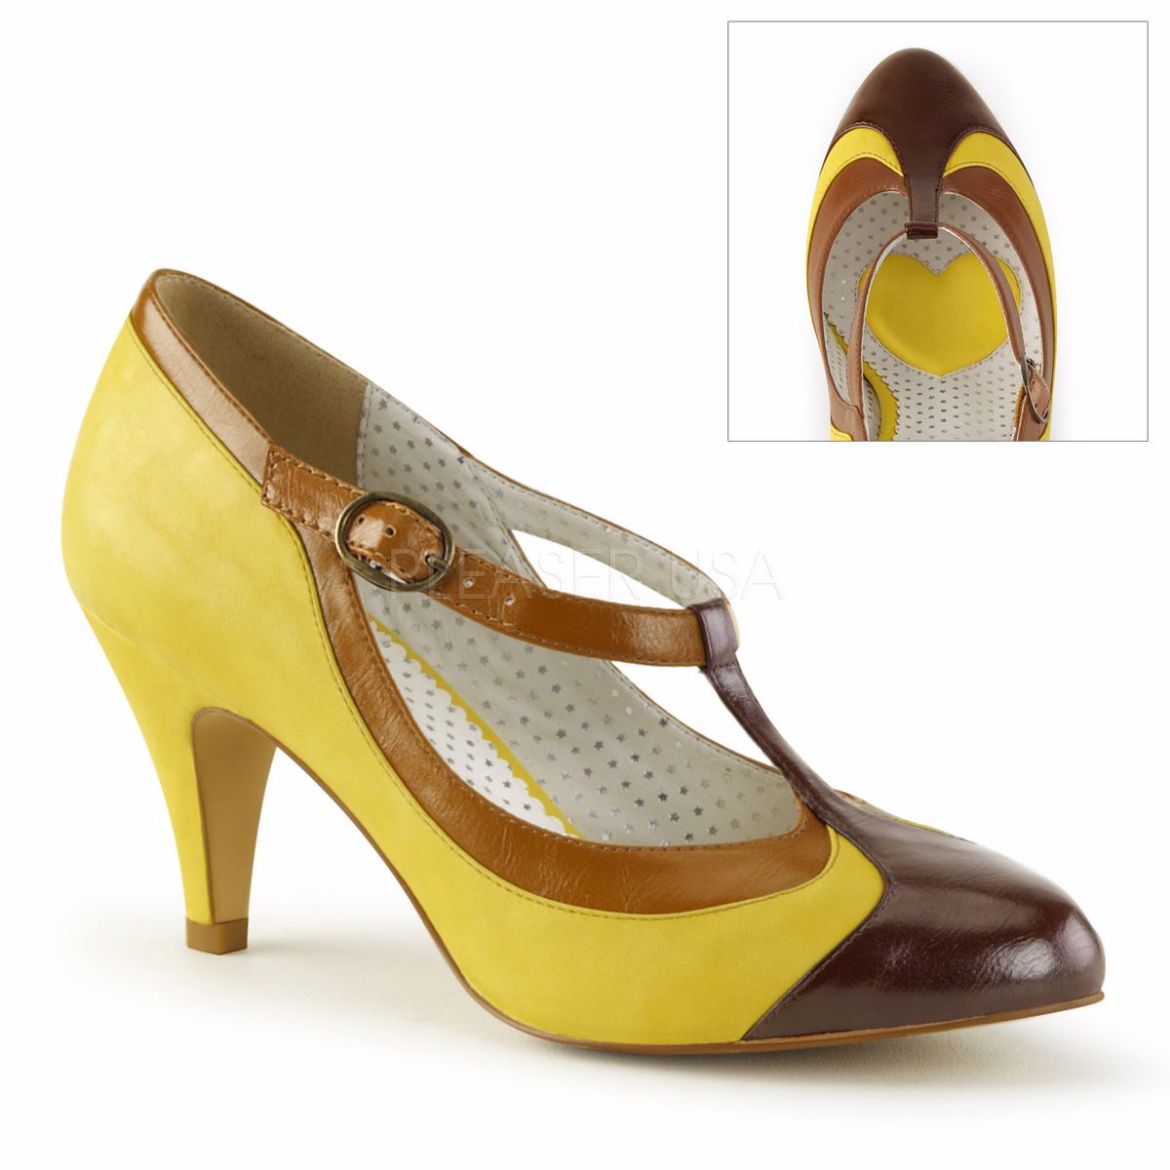 Product image of Pin Up Couture Peach-03 Yellow Multi Faux Leather, 3 inch (7.6 cm) Heel T-Strap Court Pump Shoes